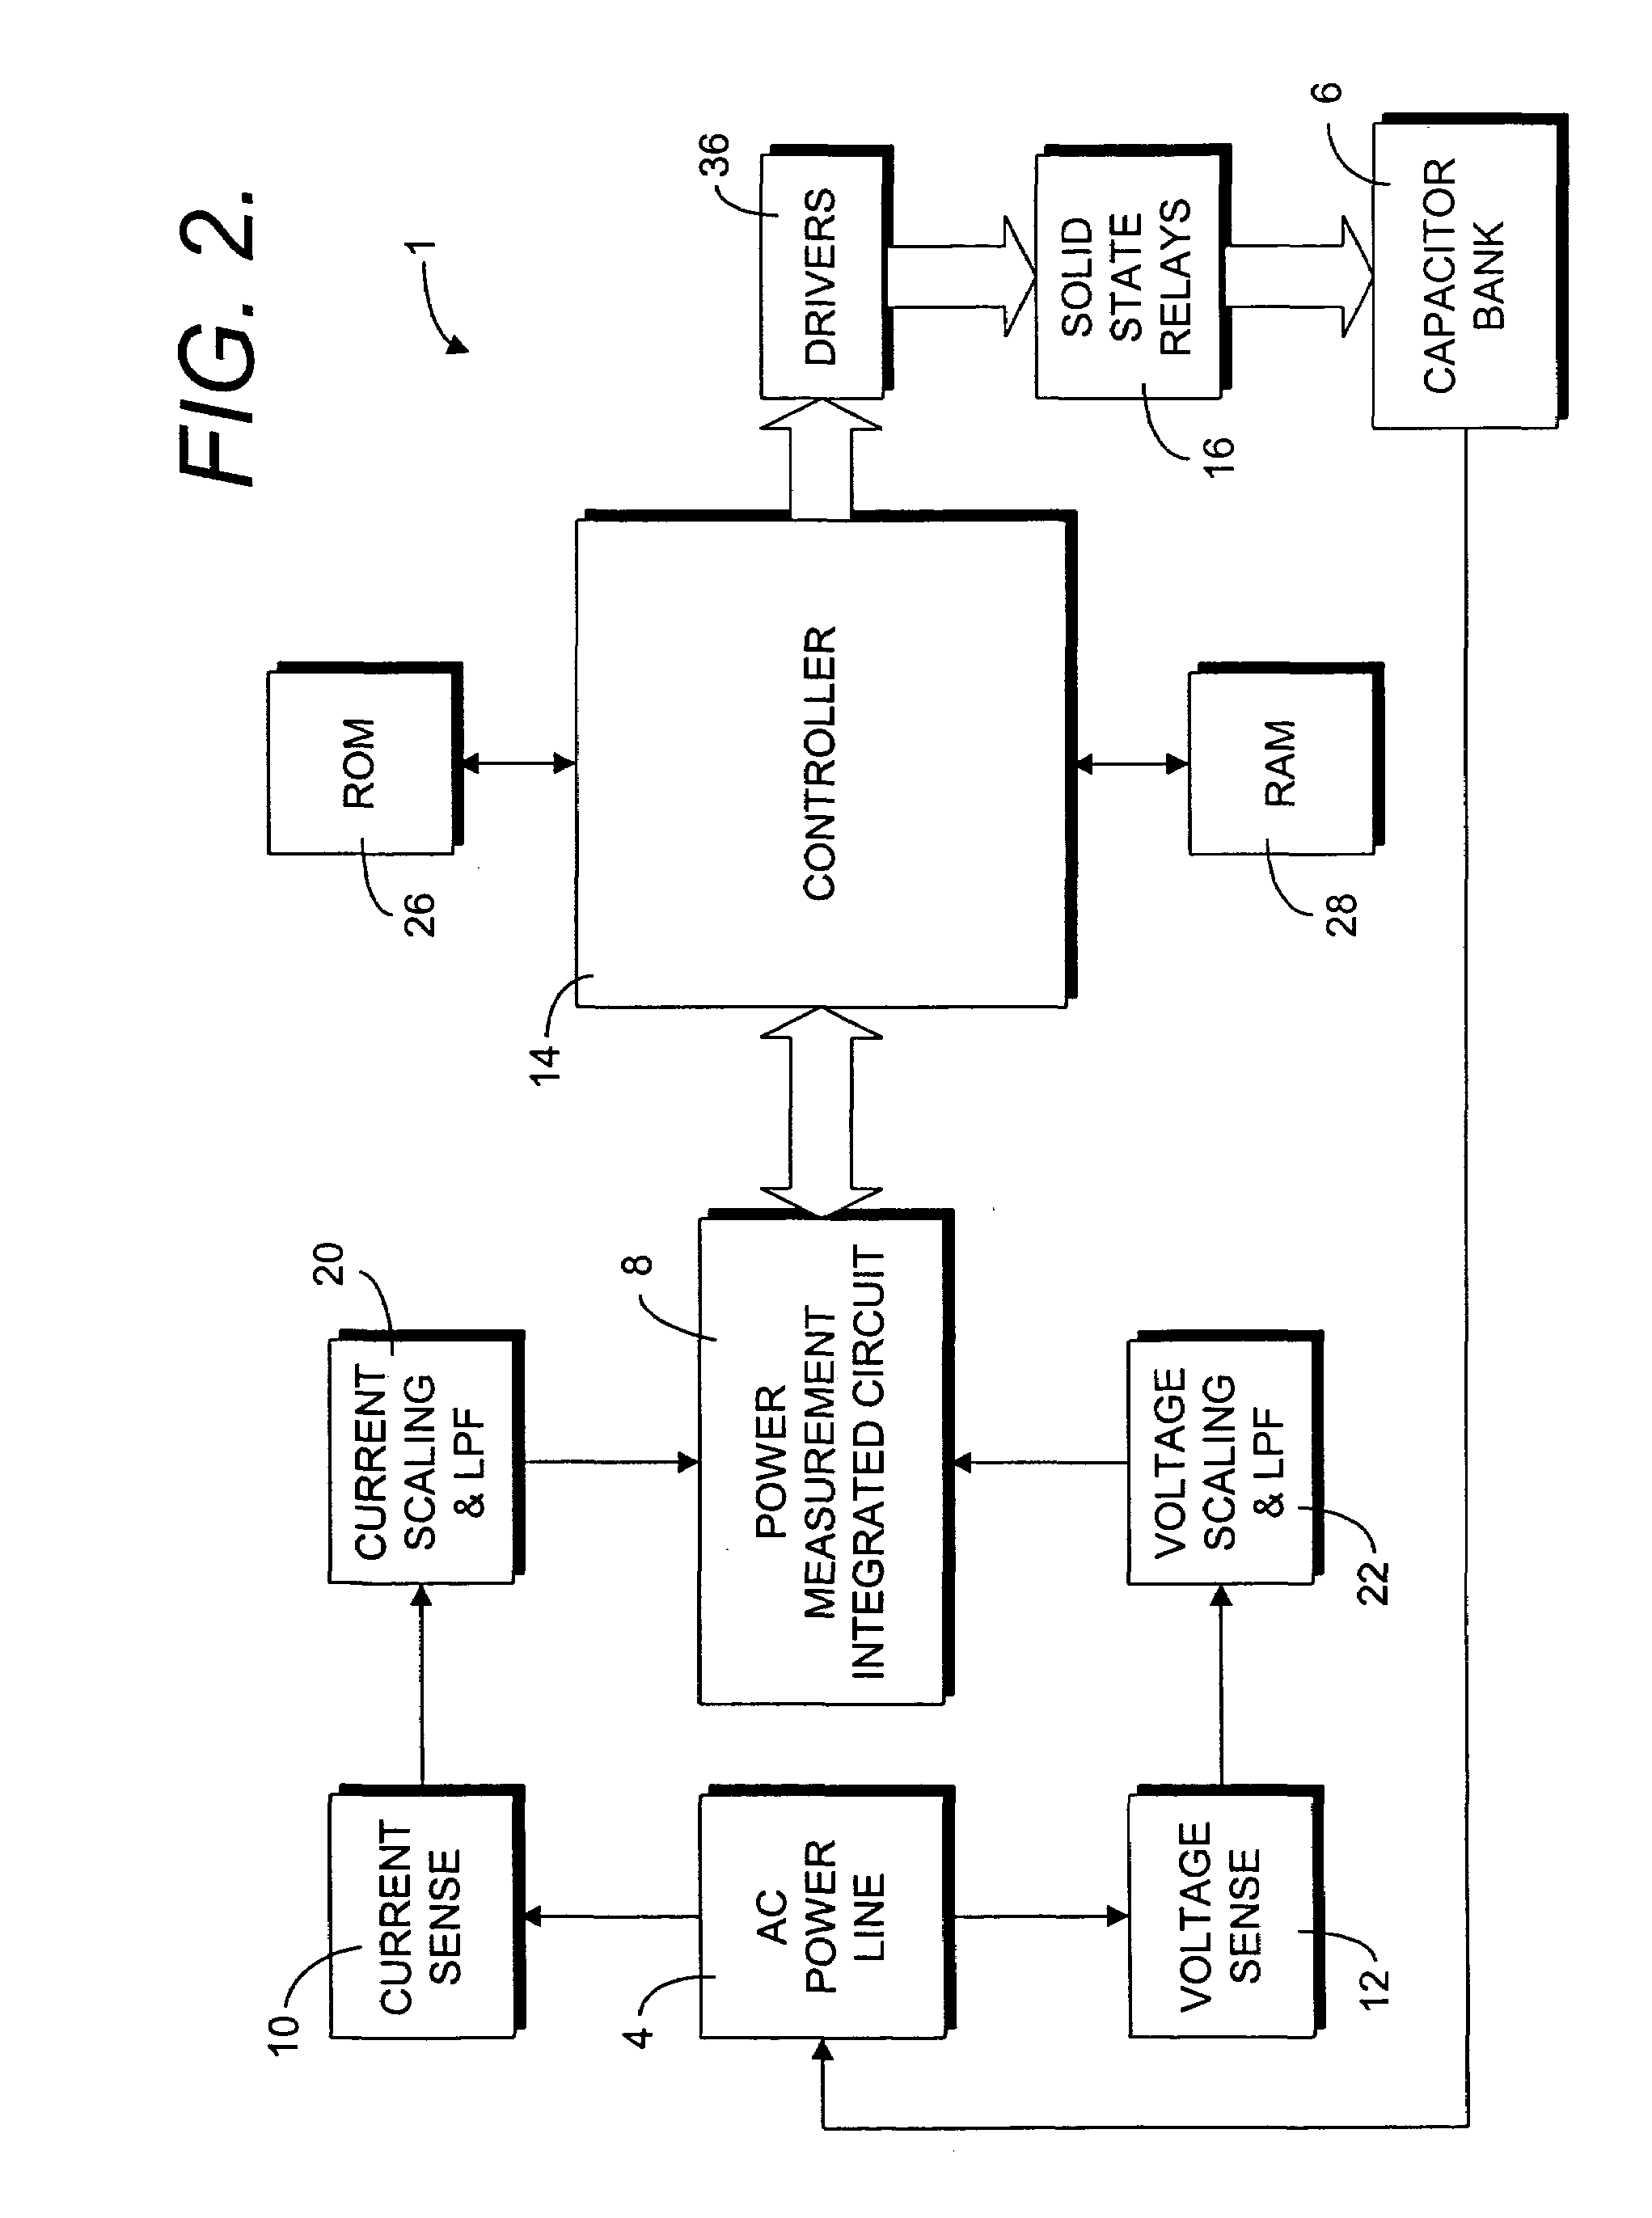 Automatic power factor correction using power measurement chip